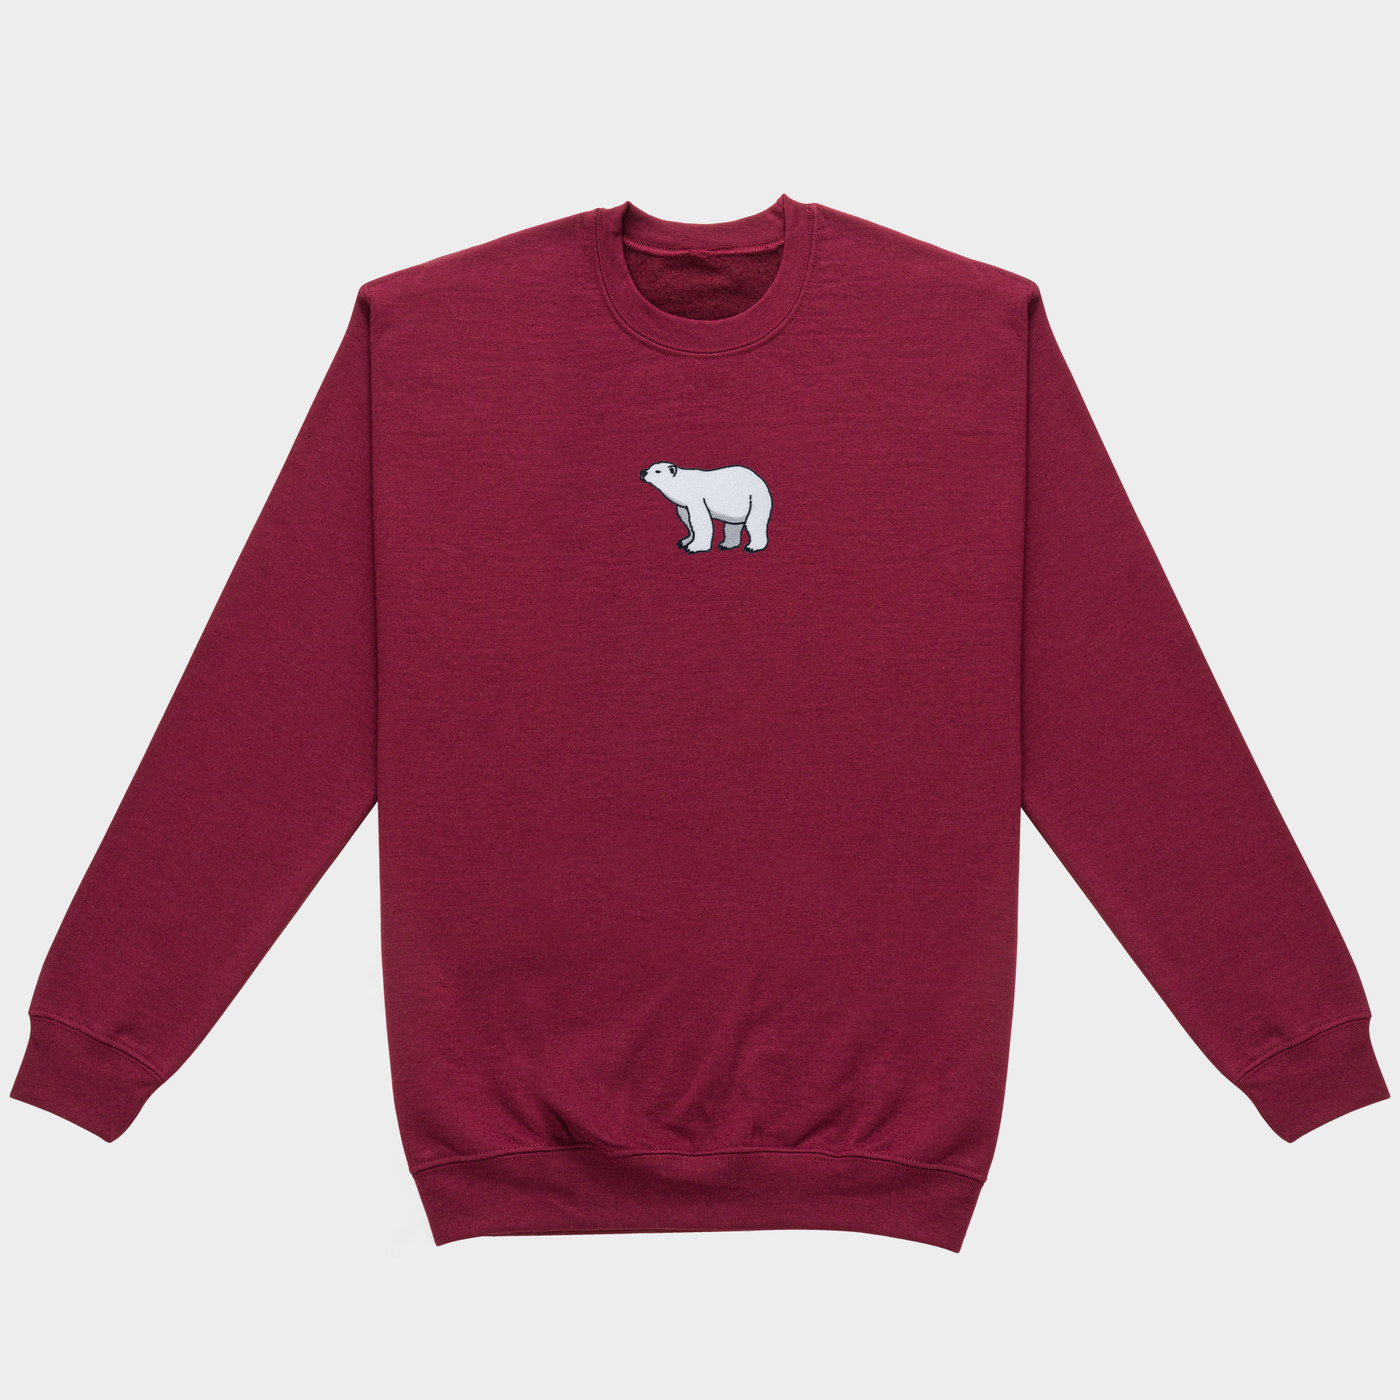 Bobby's Planet Men's Embroidered Polar Bear Sweatshirt from Arctic Polar Animals Collection in Maroon Color#color_maroon